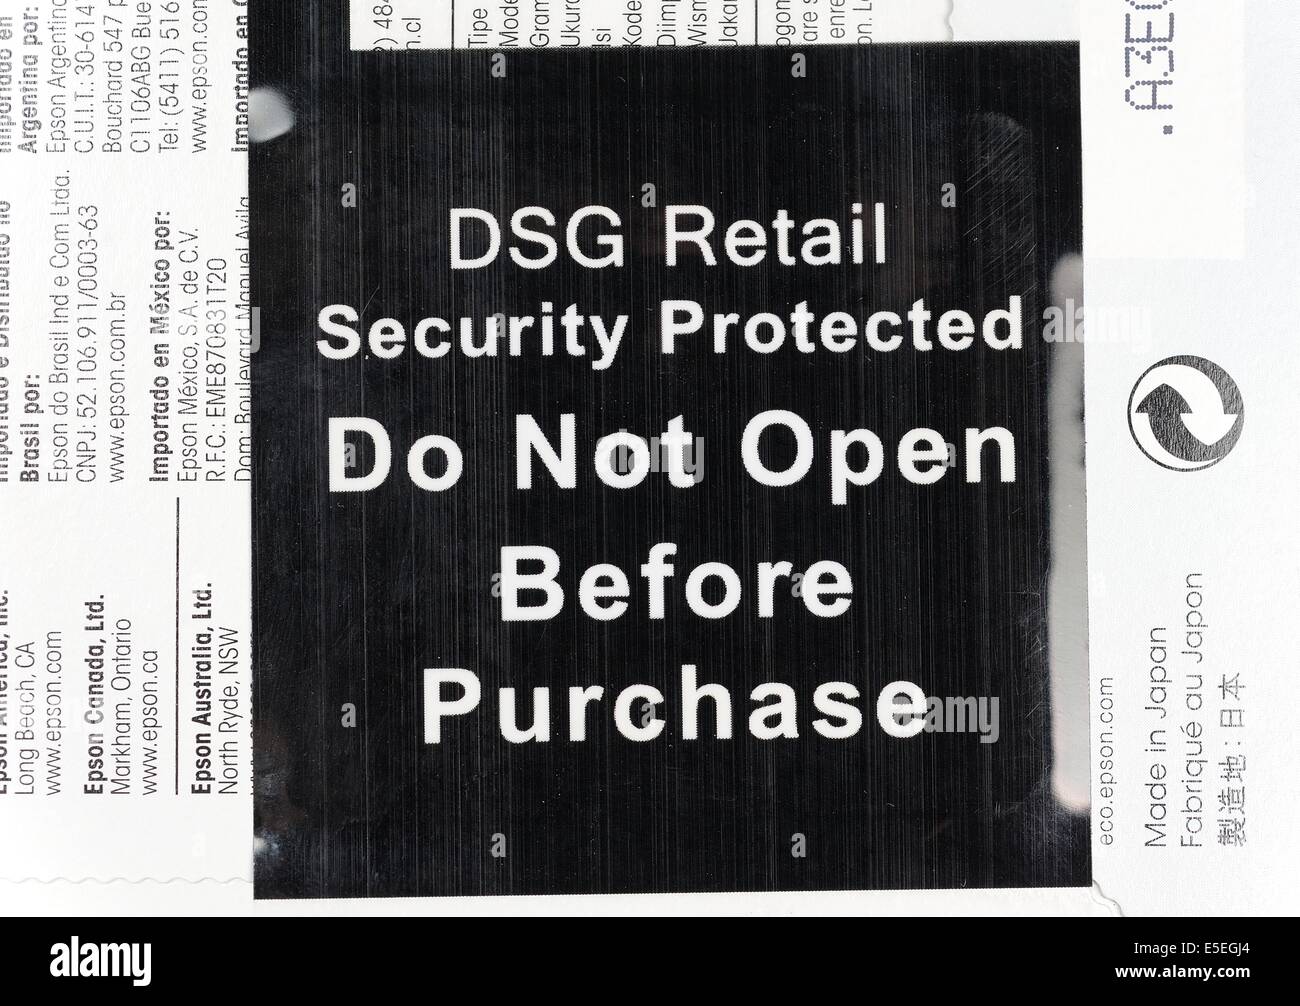 DSG retail do not open before purchase security tag Stock Photo - Alamy